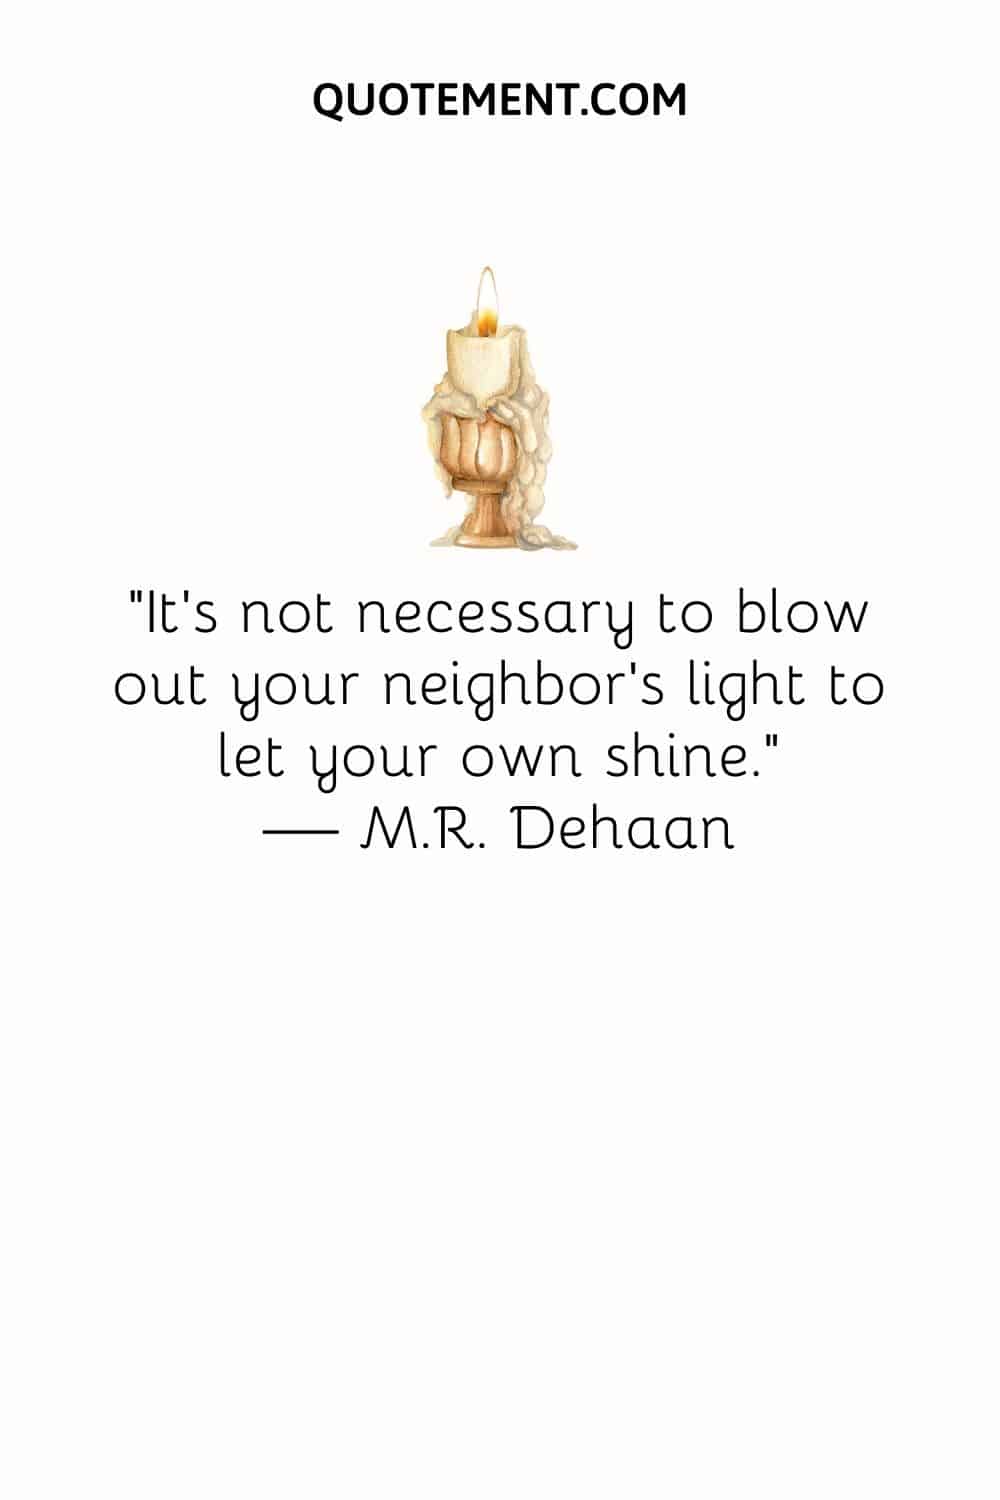 “It’s not necessary to blow out your neighbor’s light to let your own shine.” — M.R. Dehaan